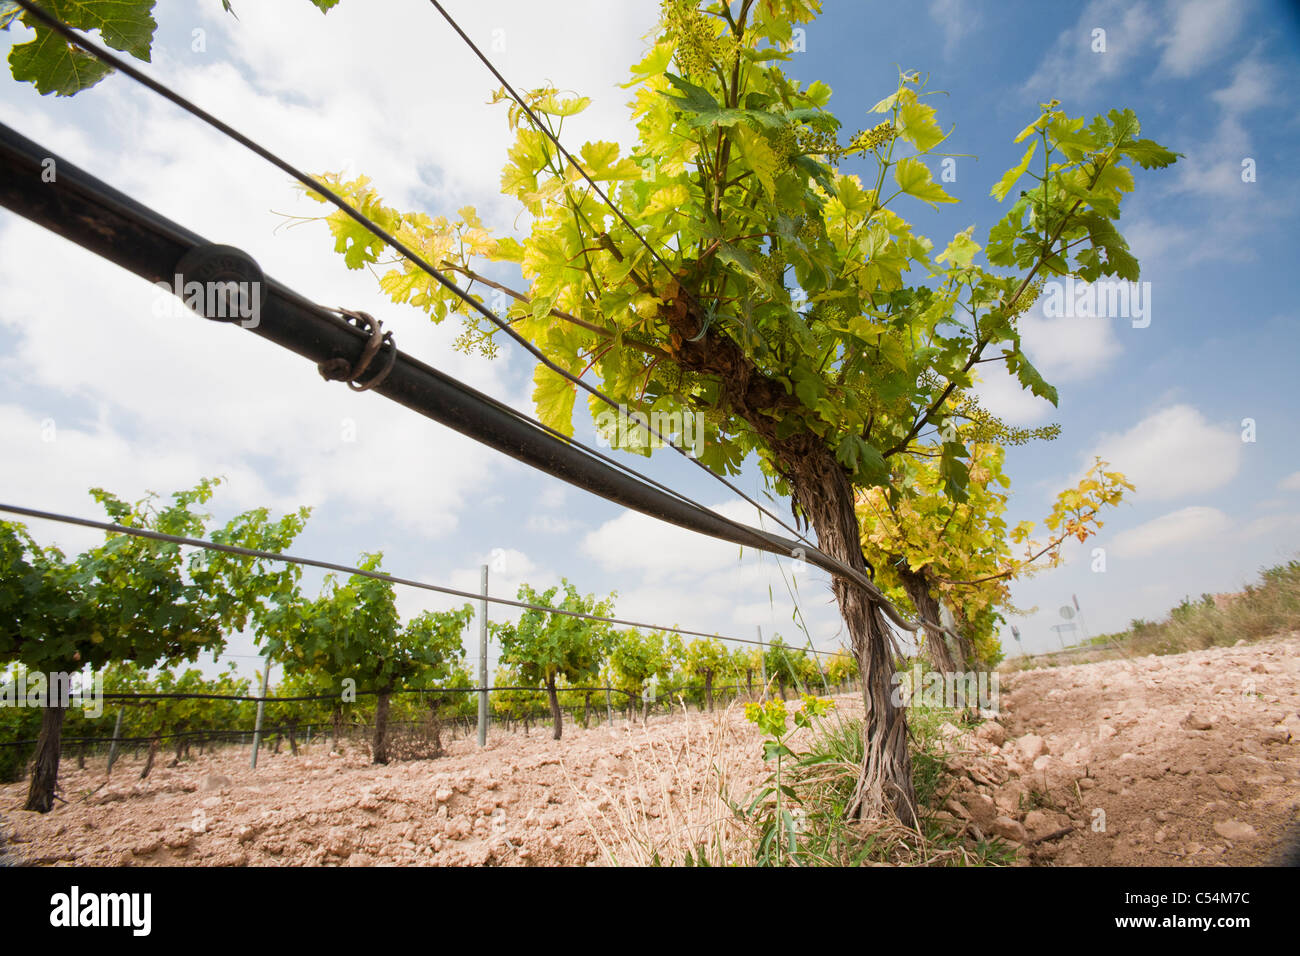 Irrigation pipes in a vineyard in Spain. Stock Photo